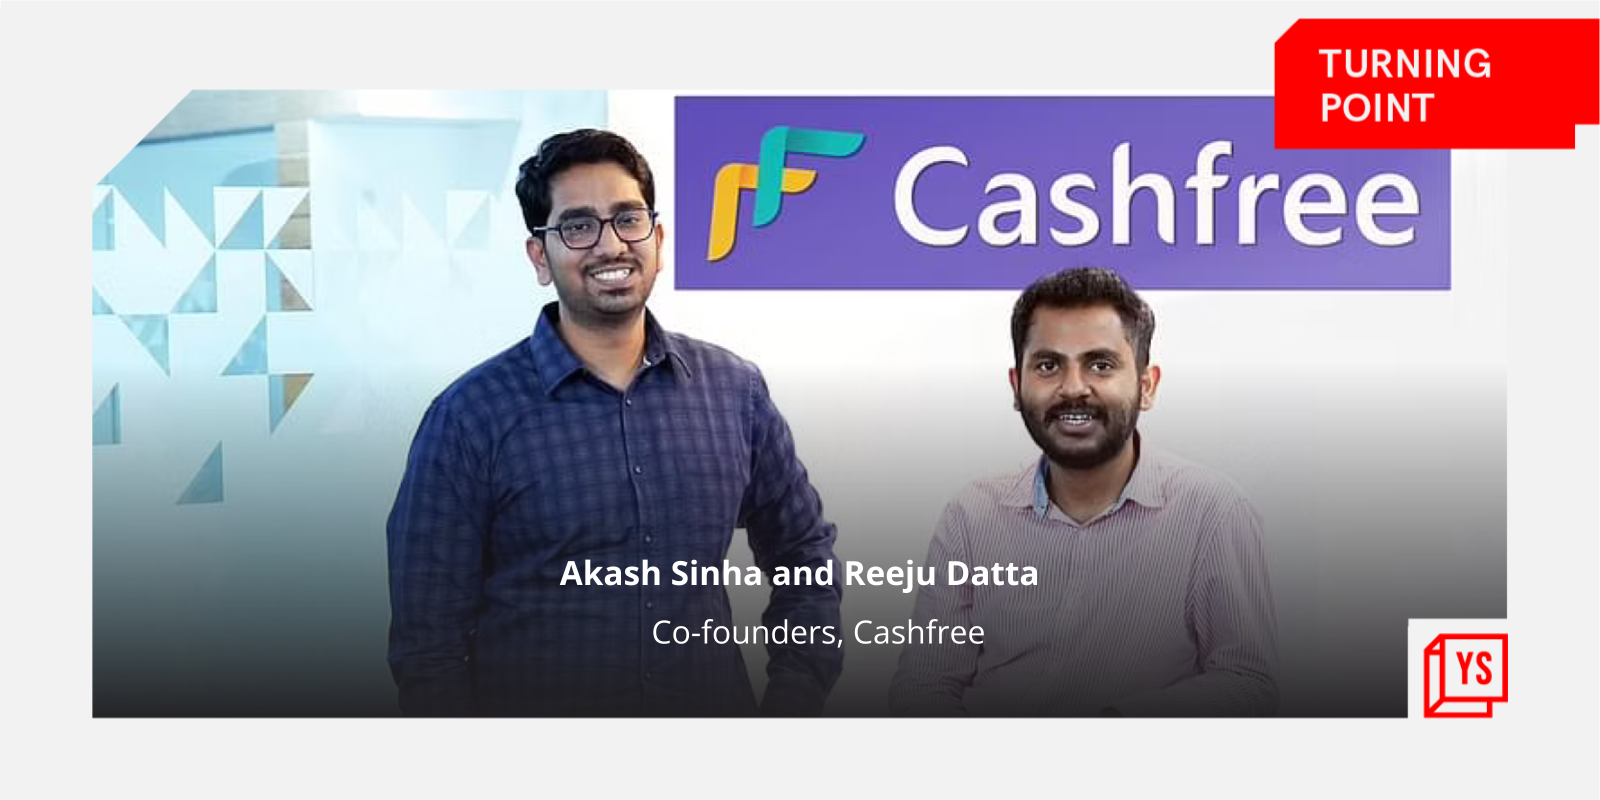 [The Turning Point] From digitising COD to starting payment gateway: Story of fintech startup Cashfree Payments